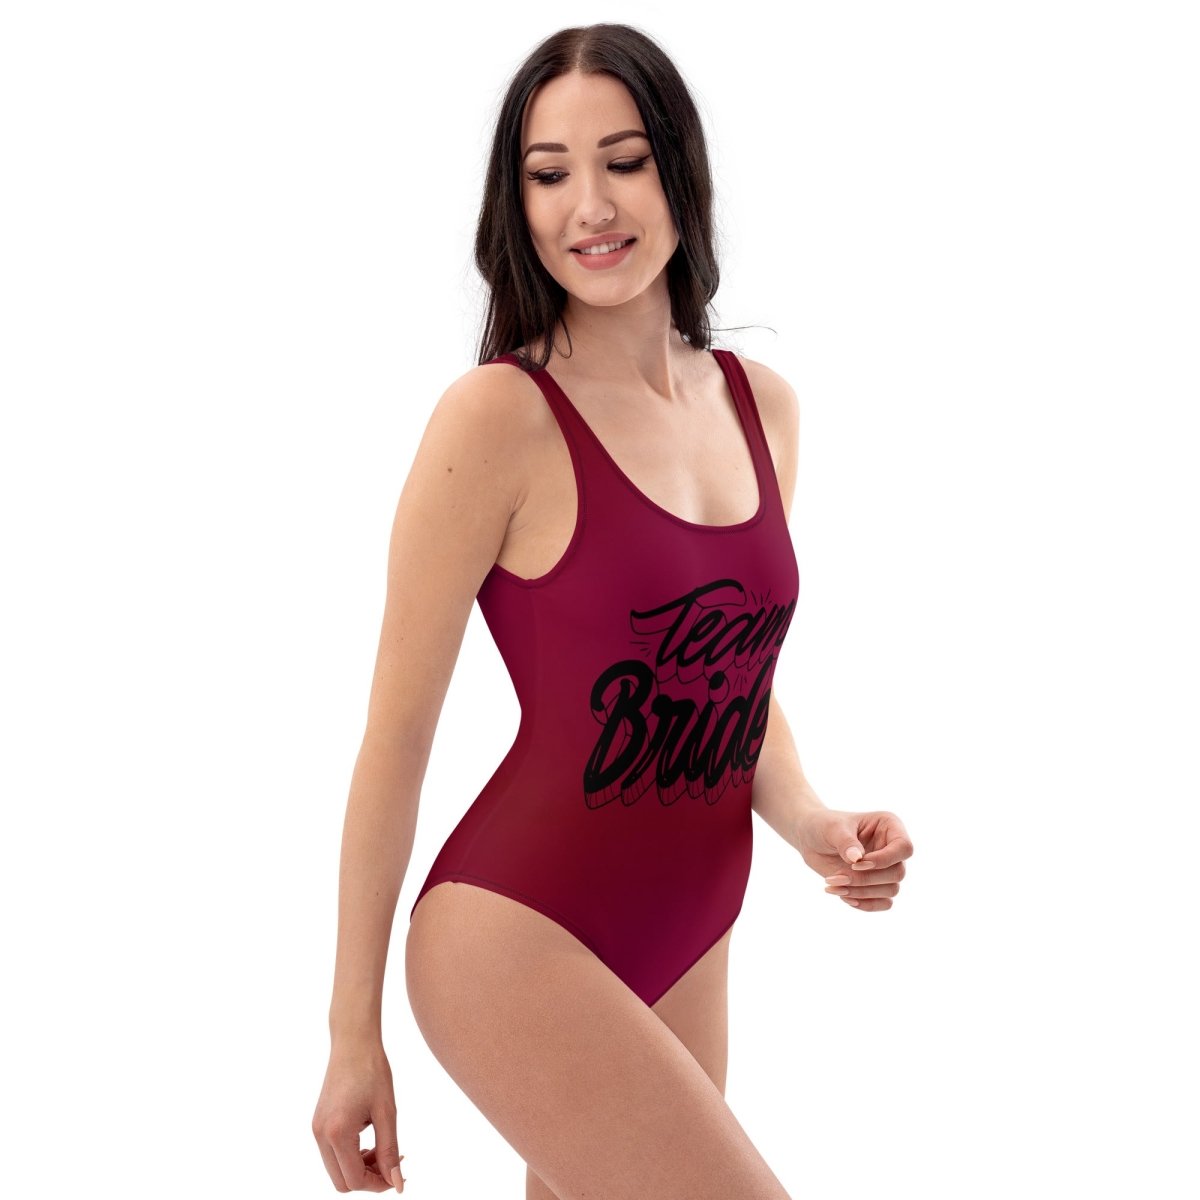 Sefira Team Bride One-Piece Swimsuit | Sefira Beach Collection Woman - Sefira Collections